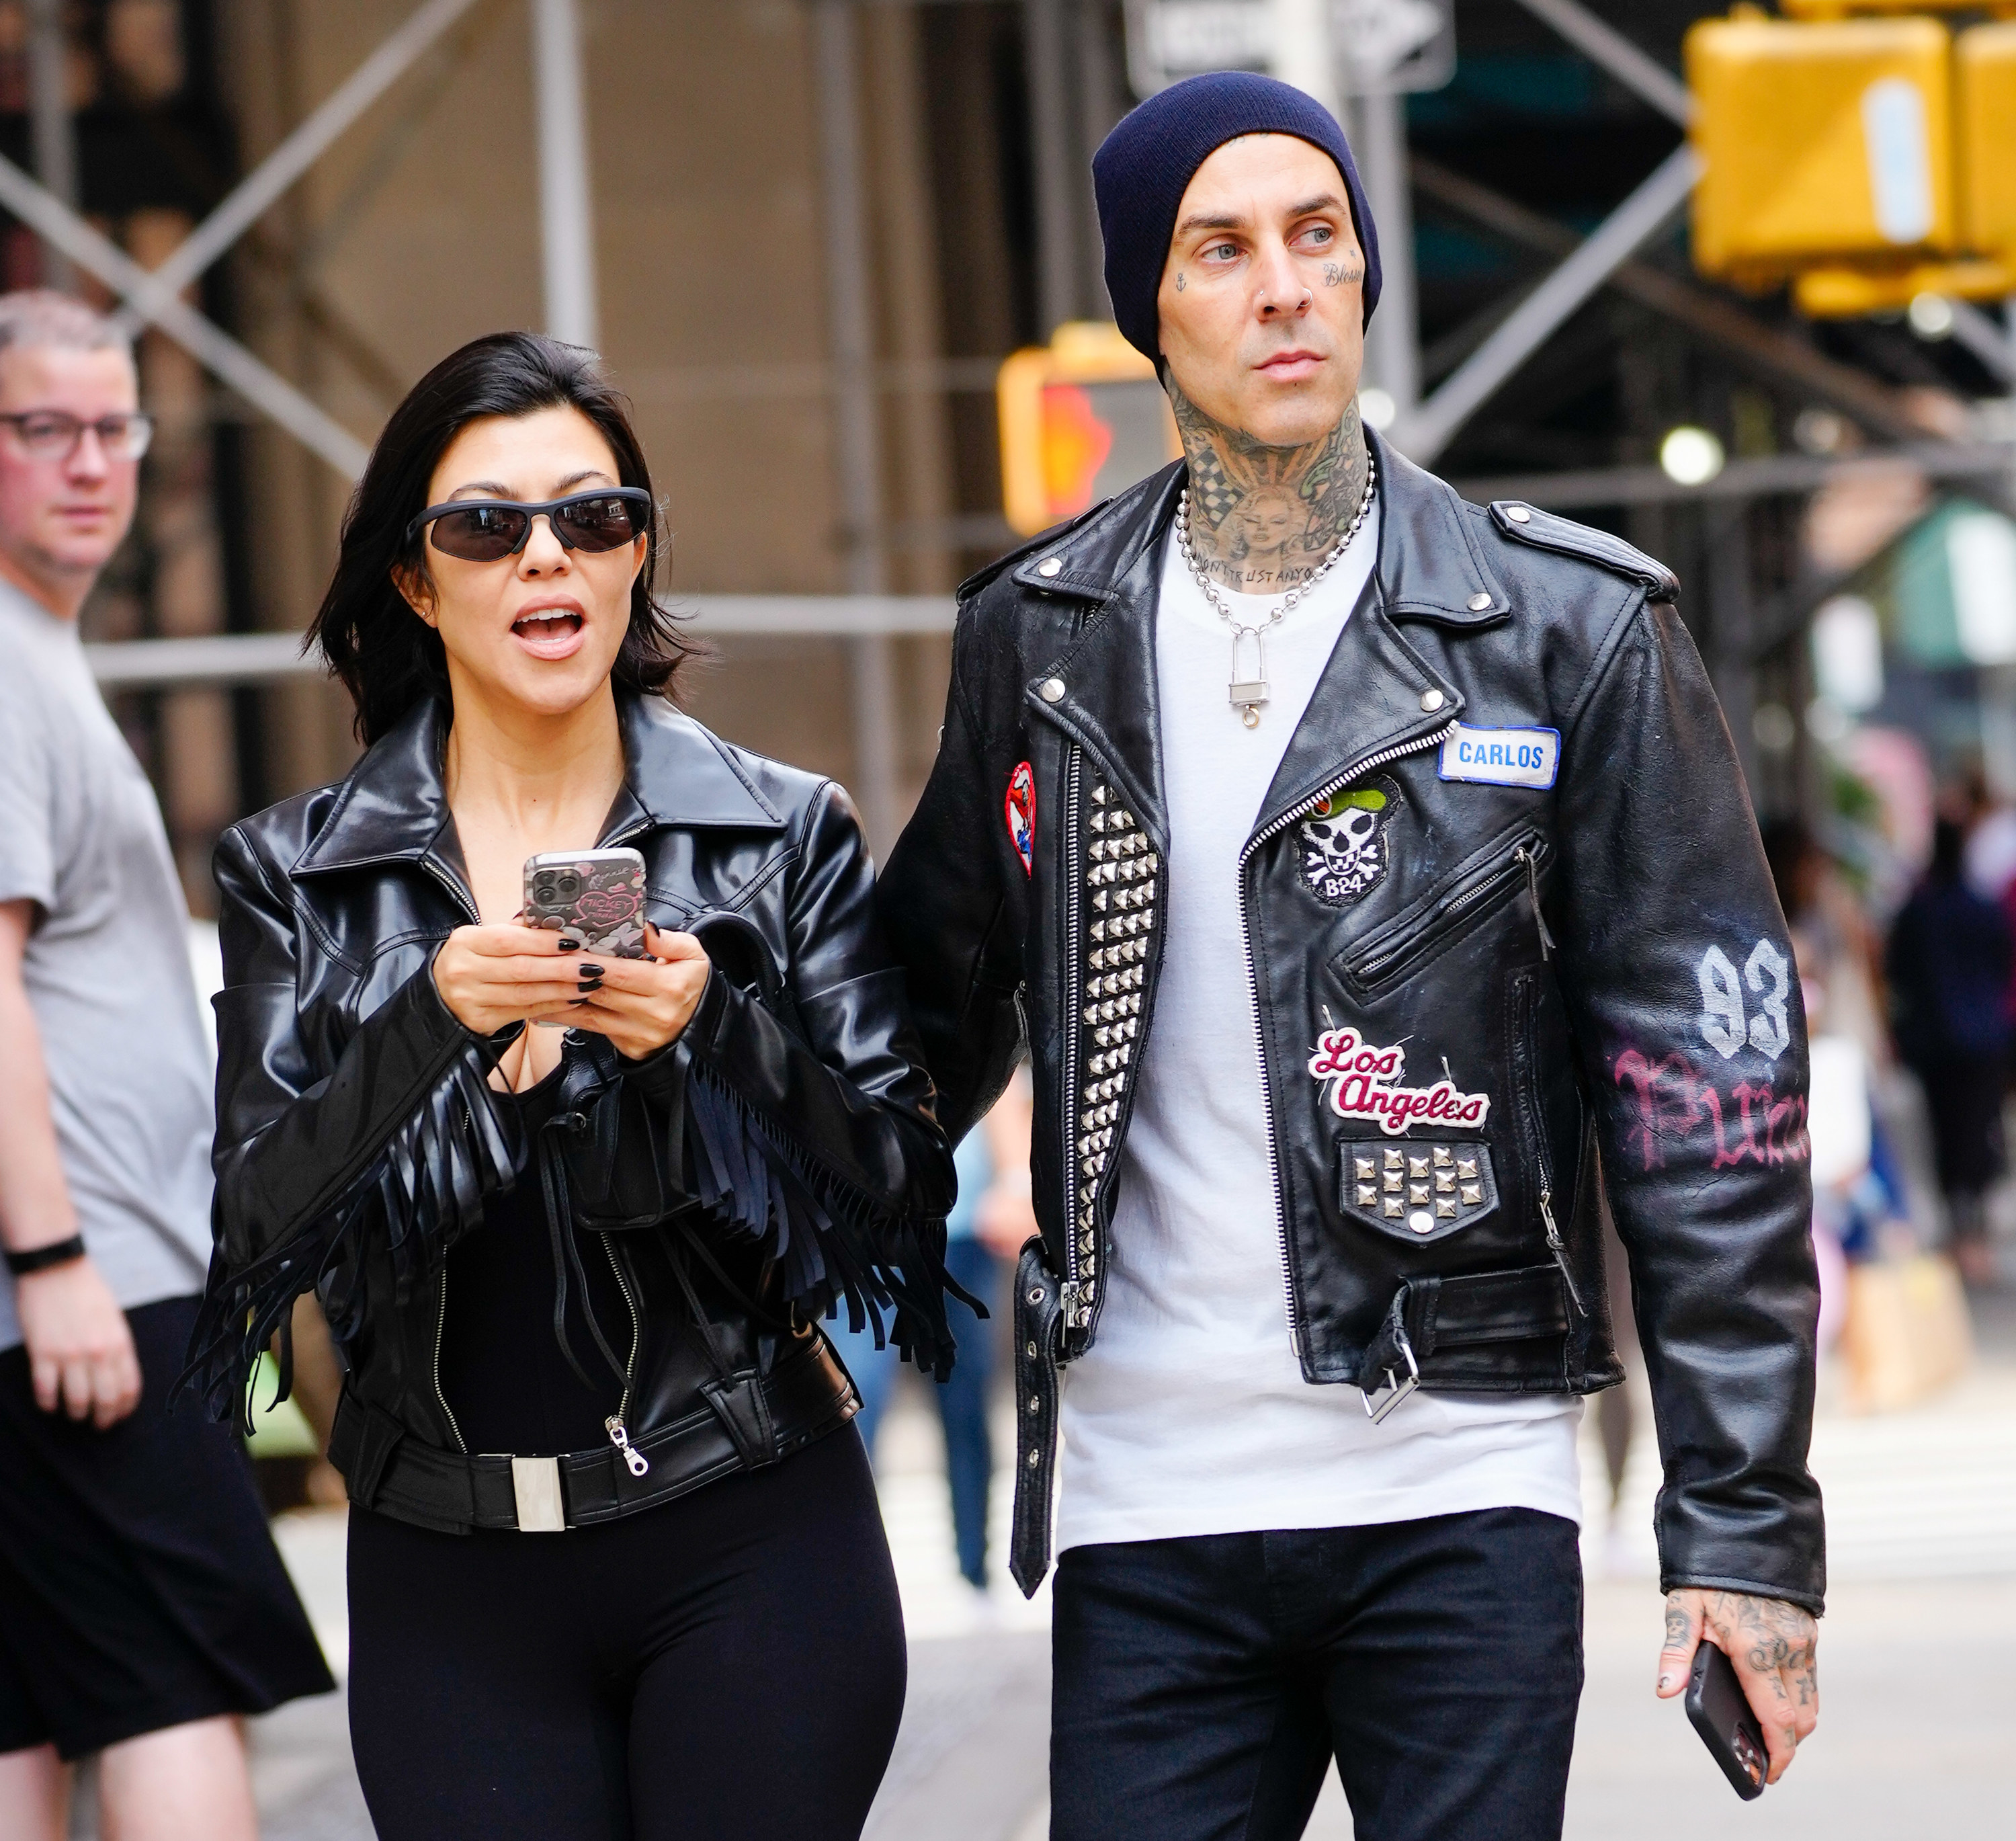 Kourtney holds her phone while walking down the street as Travis puts his hand on her back